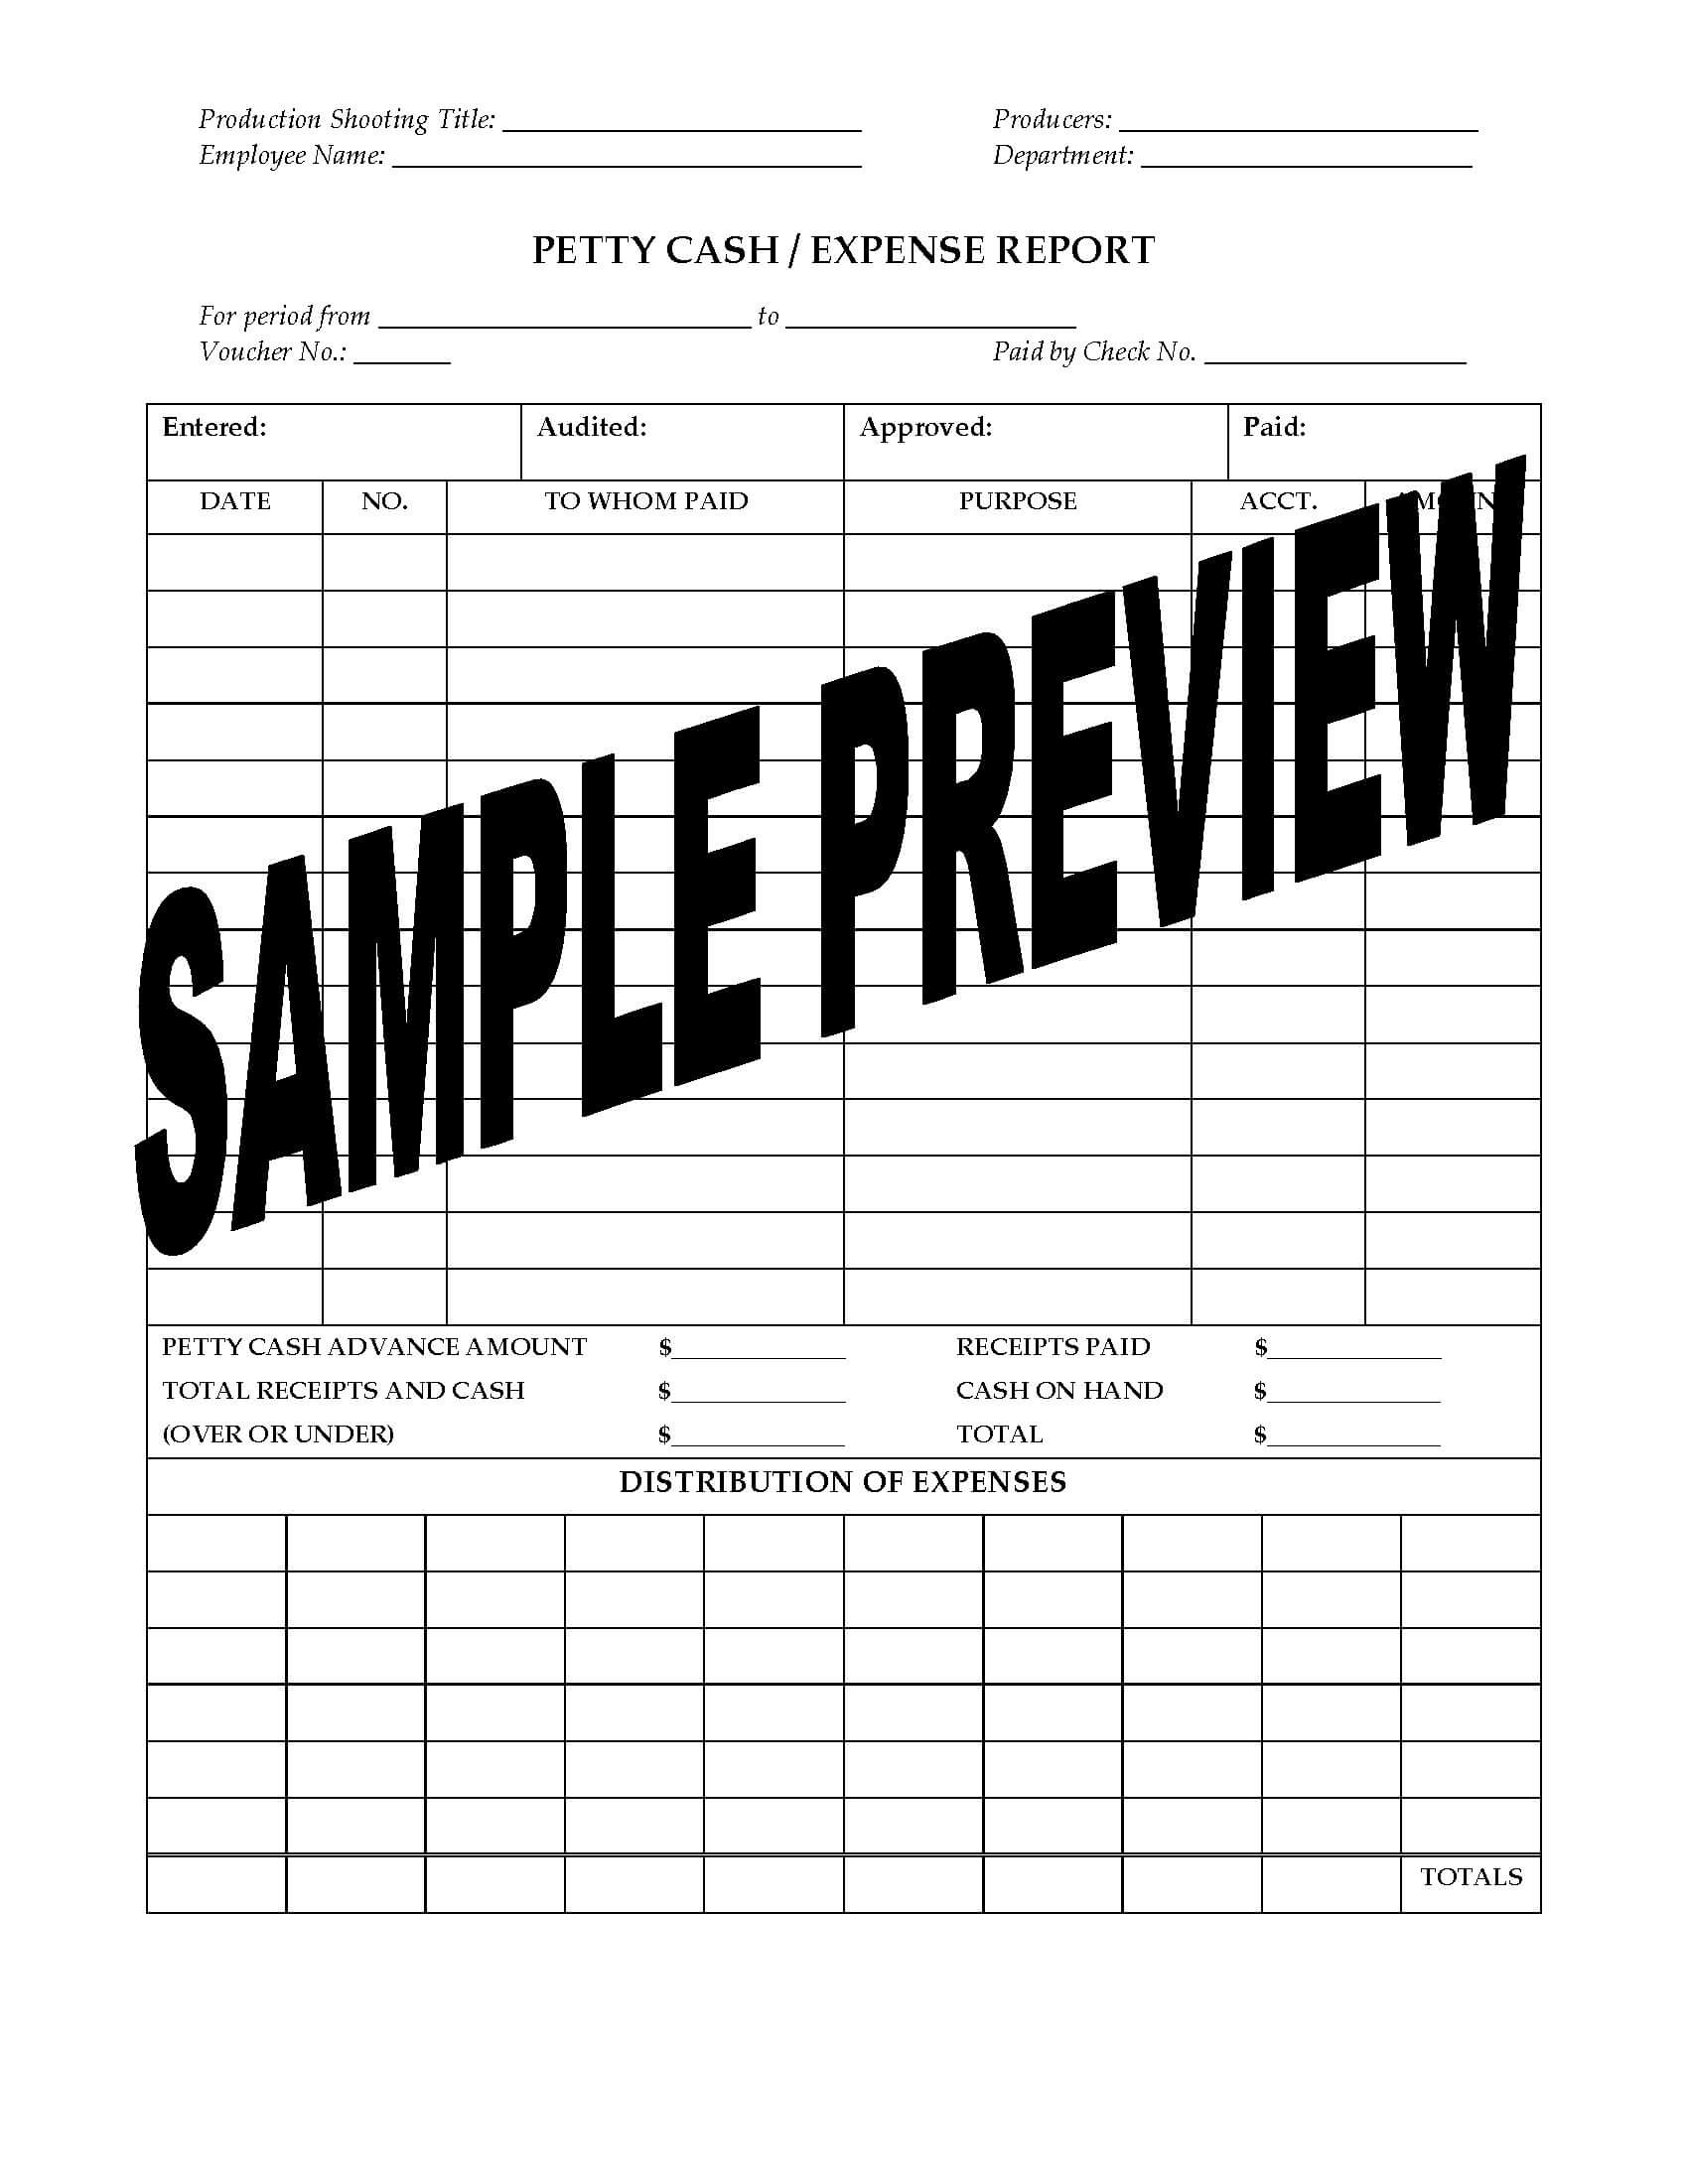 Petty Cash Expense Report For Film Or Tv Production Regarding Petty Cash Expense Report Template